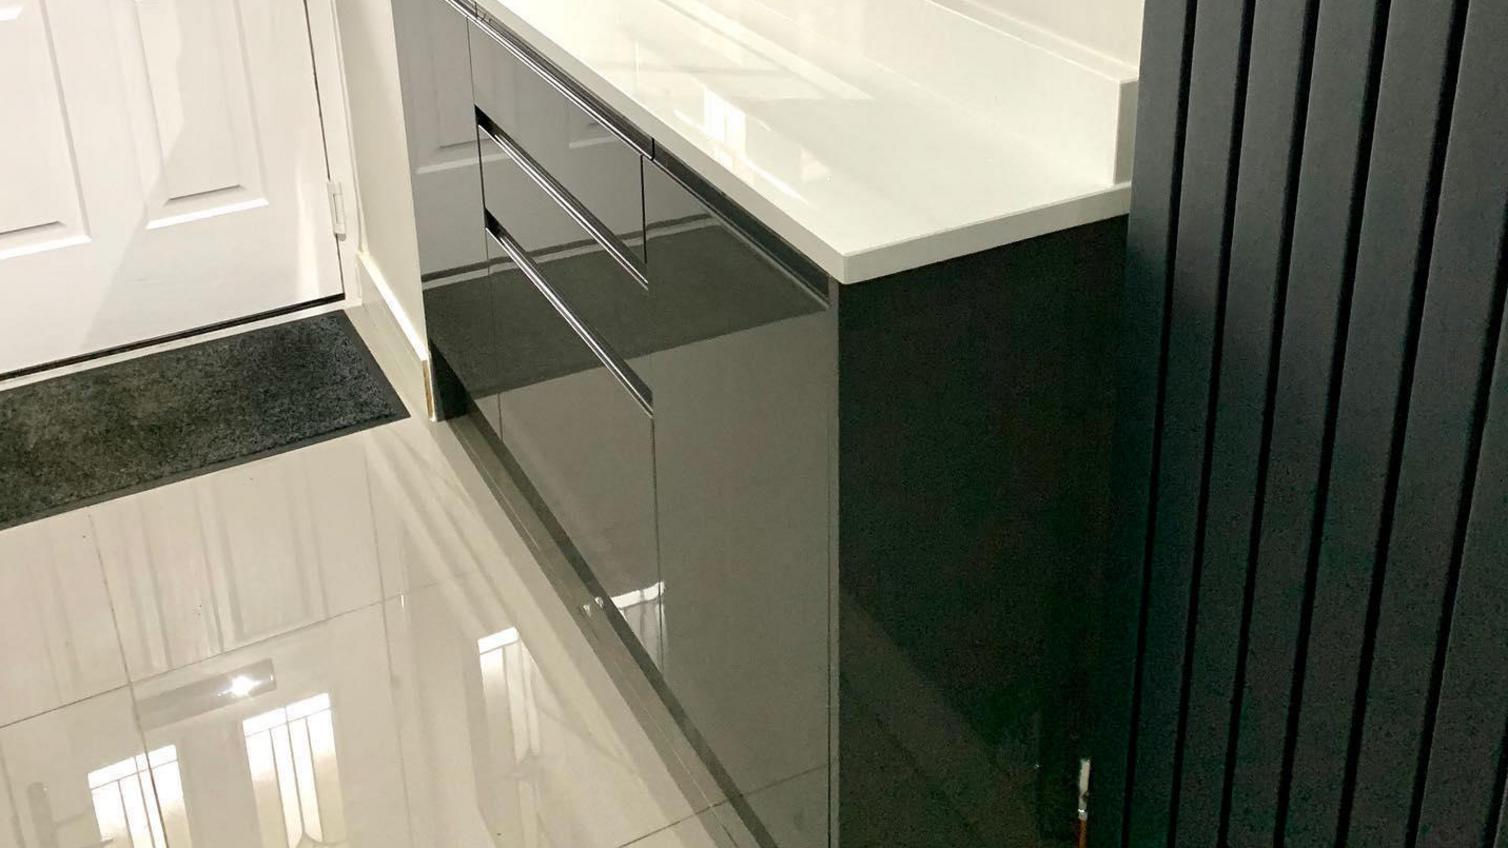 Black boot room ideas using glossy kitchen doors with integrated handles in graphite. Includes white worktops and floors.